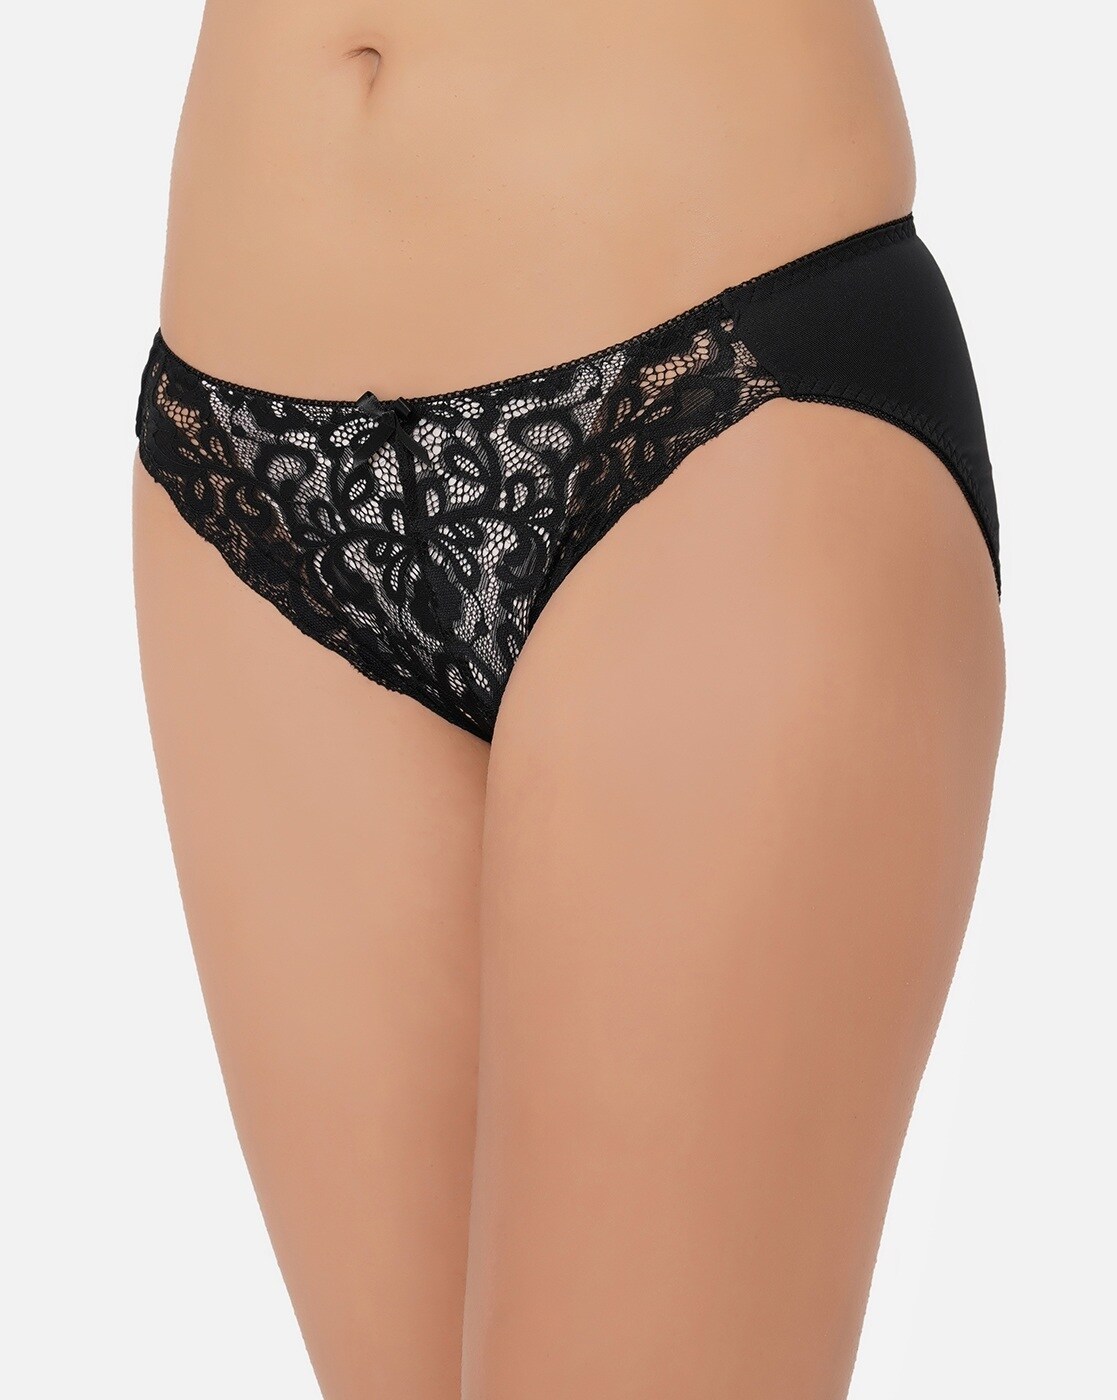 Lace Hipsters Panties